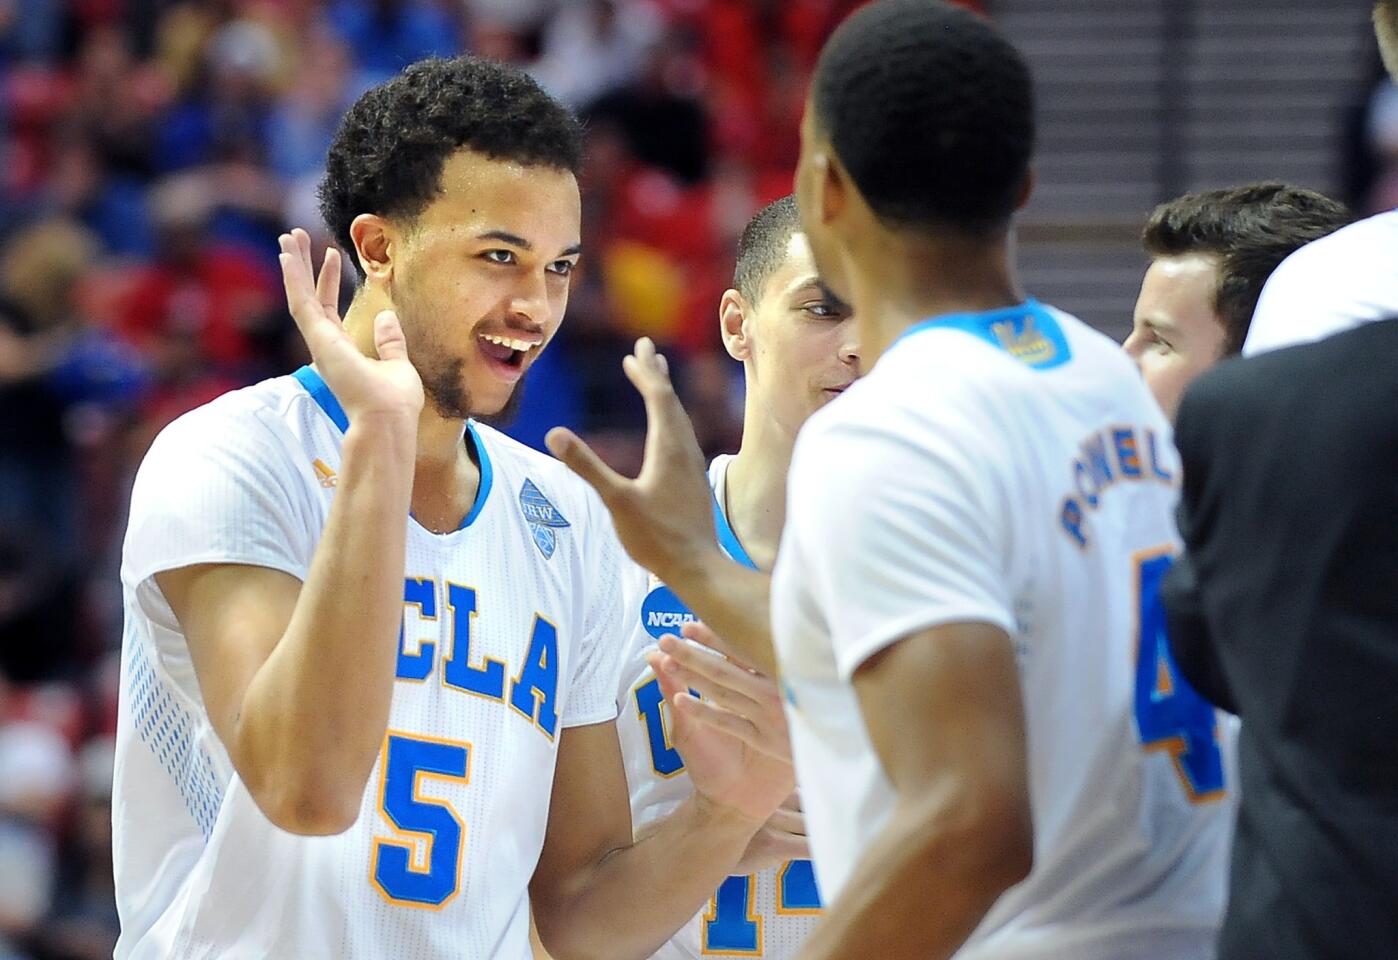 Bruins guards Kyle Anderson (5) and Norman Powell (4) celebrate after defeating Stephen F. Austin, 77-60, in the third round of the NCAA tournament on Sunday evening in San Diego.